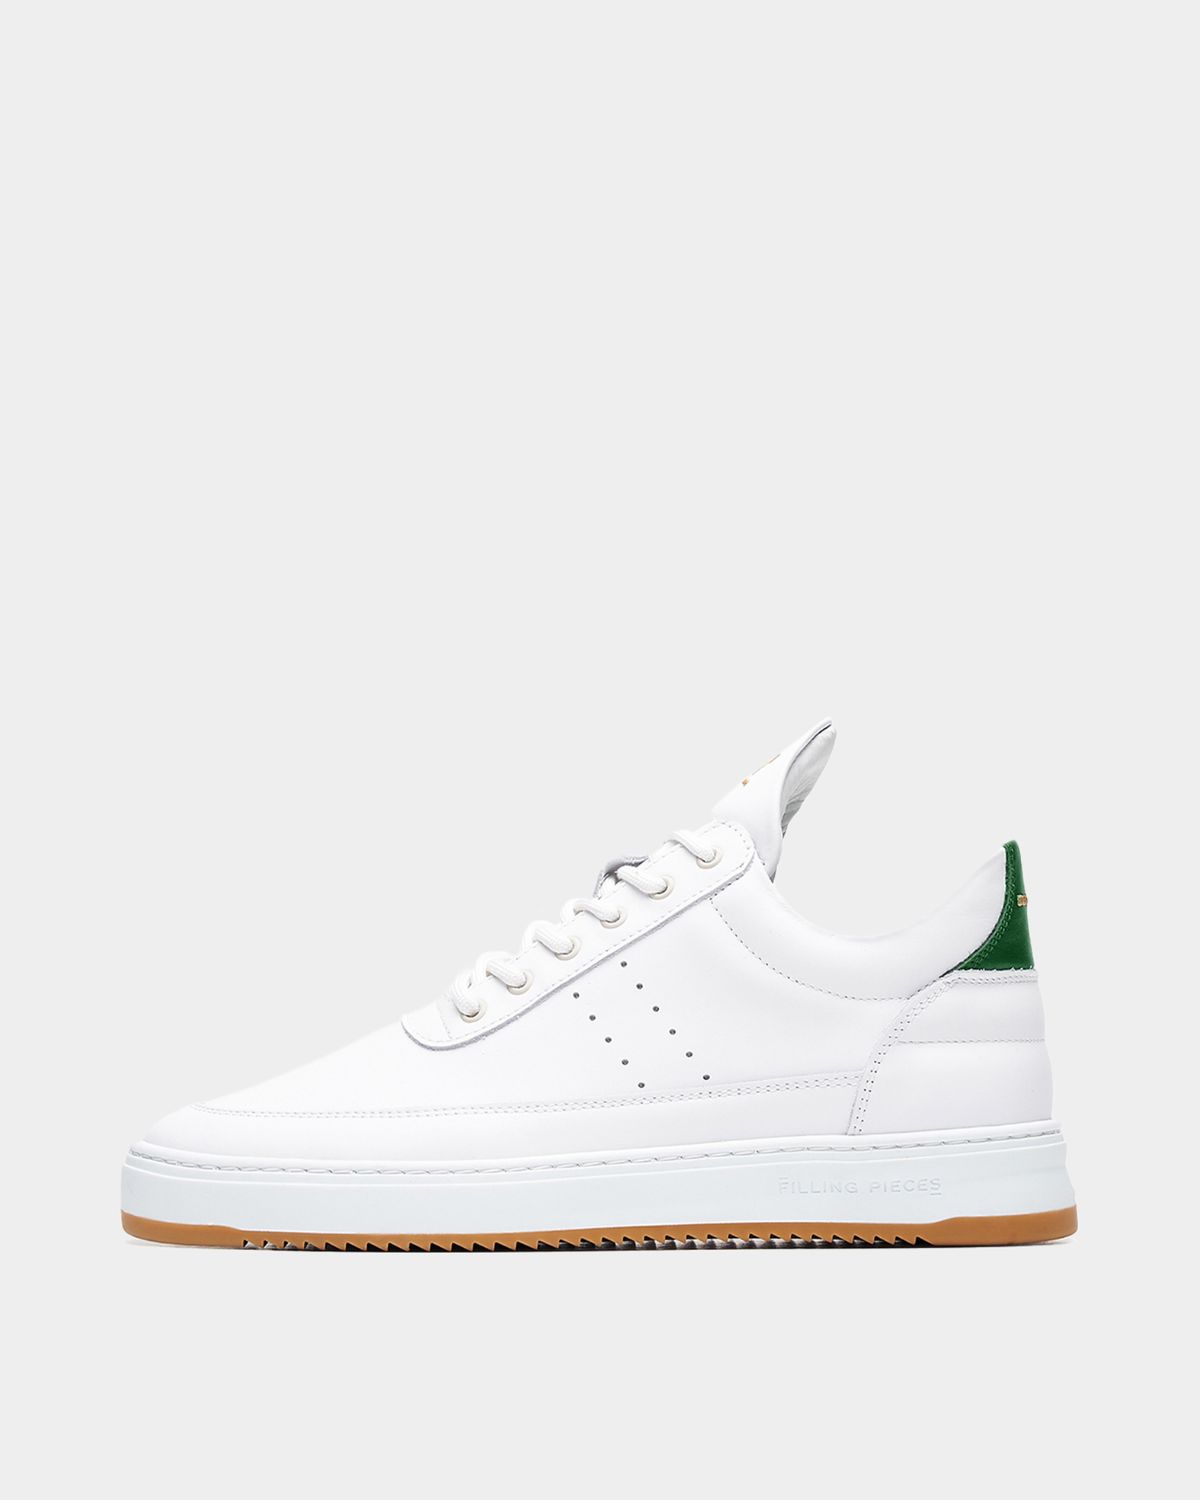 Woord In zicht Glimmend Low Top Bianco Green - Filling Pieces